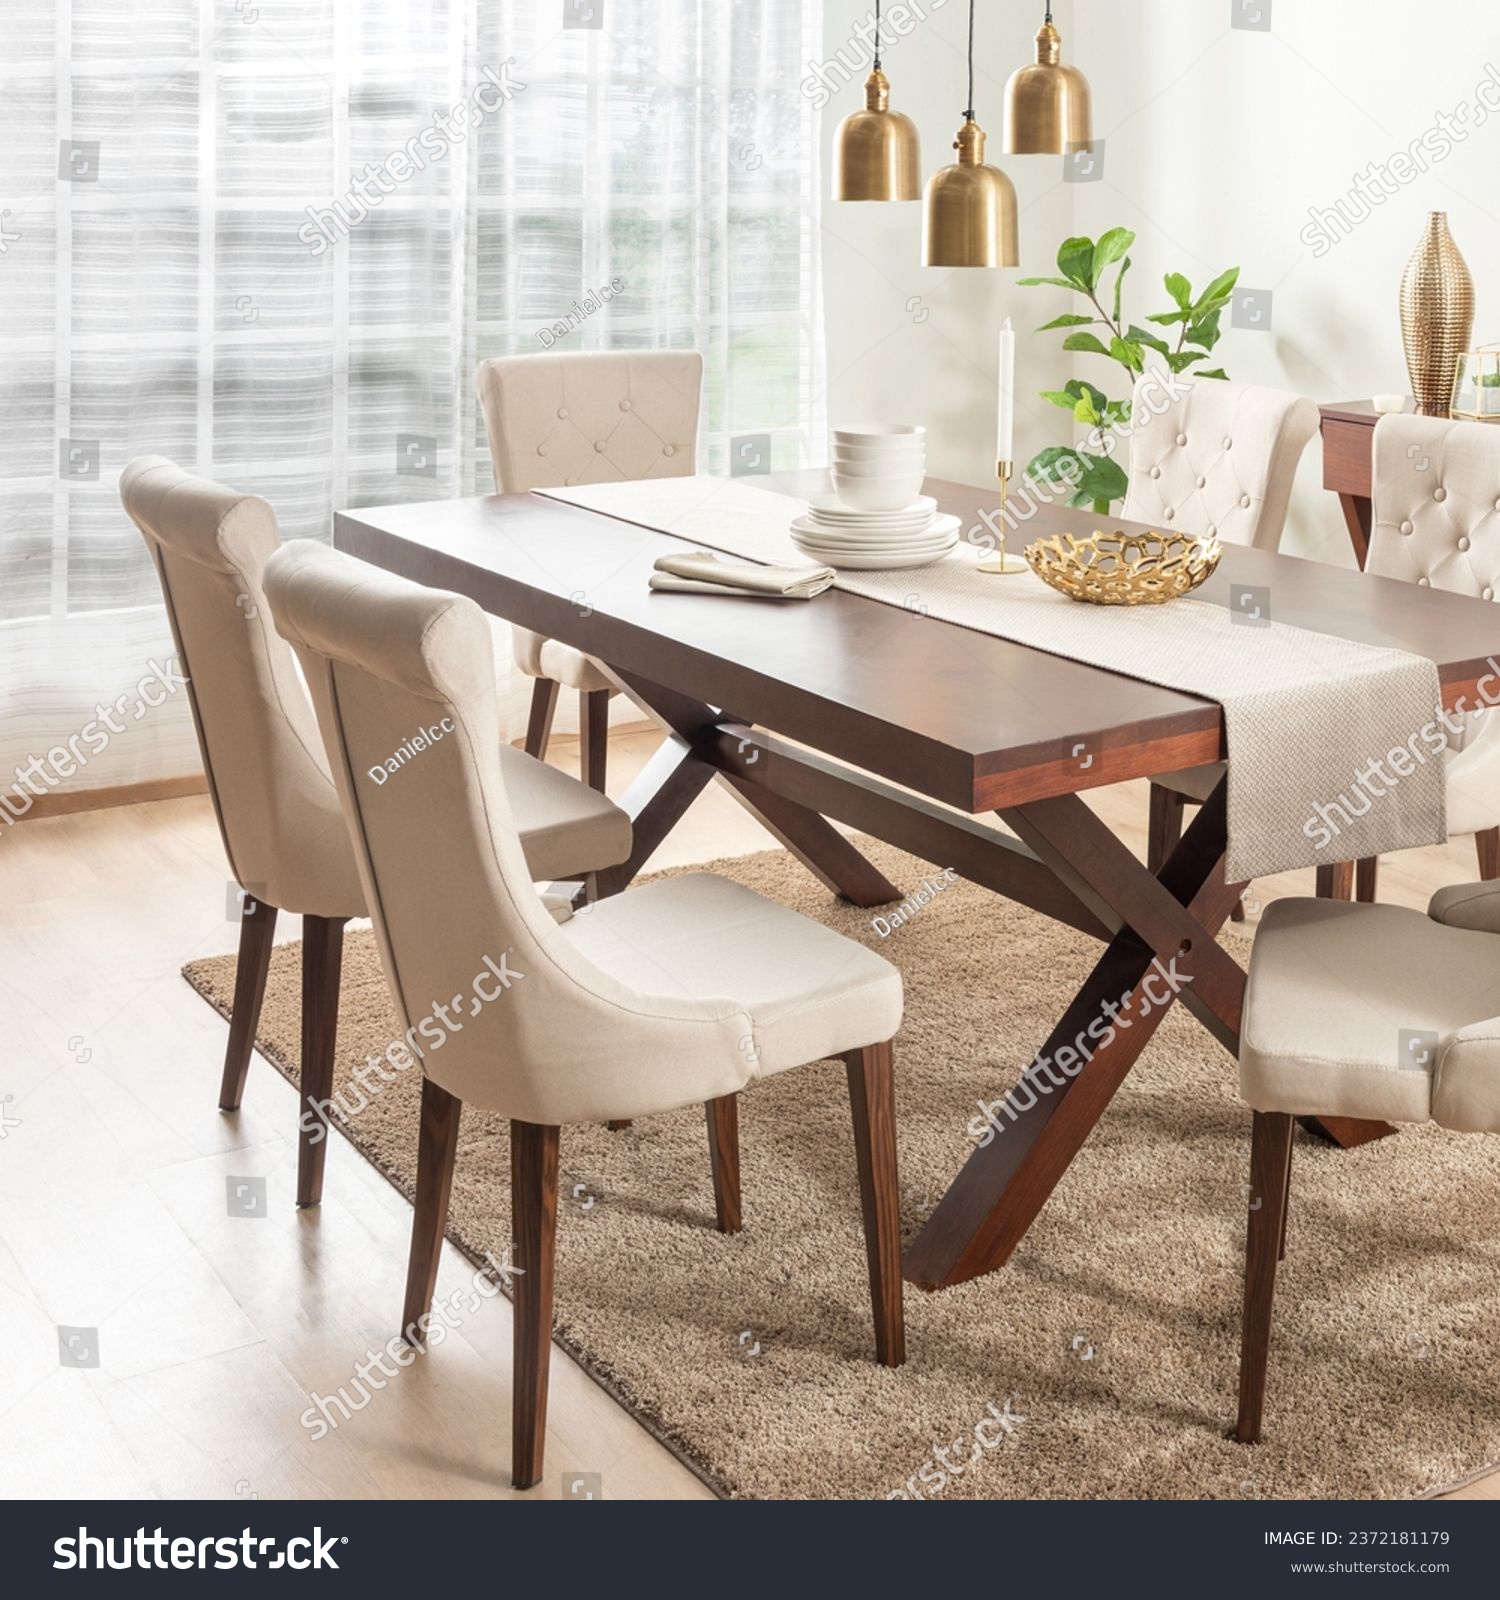 Dining Room with Rectangle Wooden Dining Table Set and Fabric Beige Button Dining Chairs with Wooden Legs, Adorned by Linen Table Runner, White Ceramic Dinnerware Set, and Ornaments on the Table. #2372181179